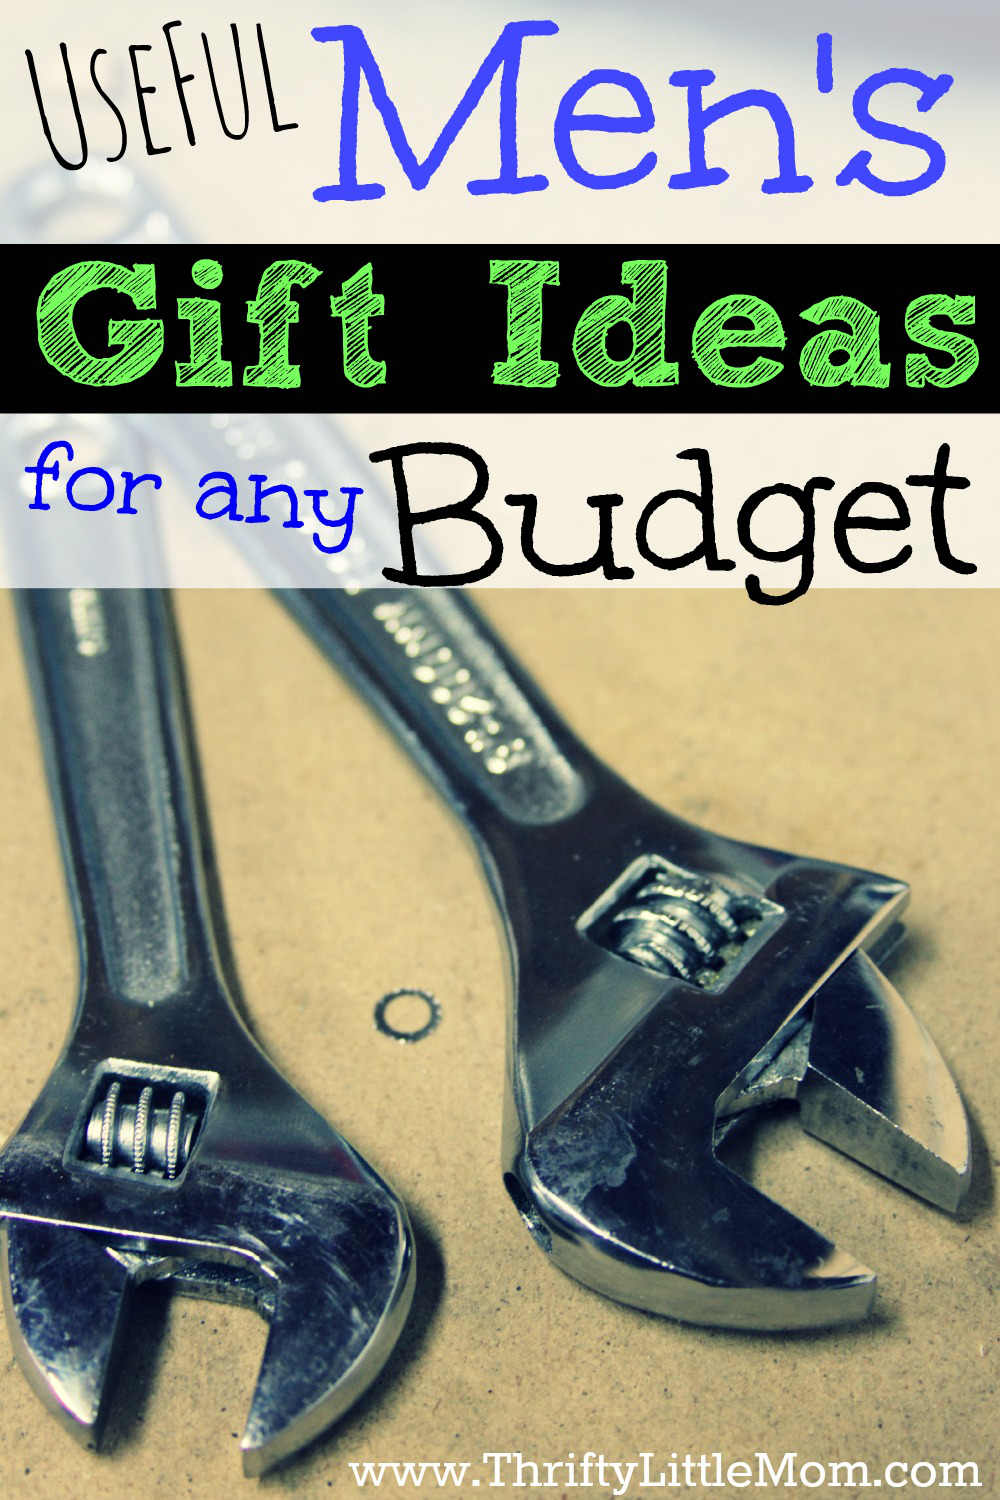 Useful Men's Gift Ideas For Any Budget